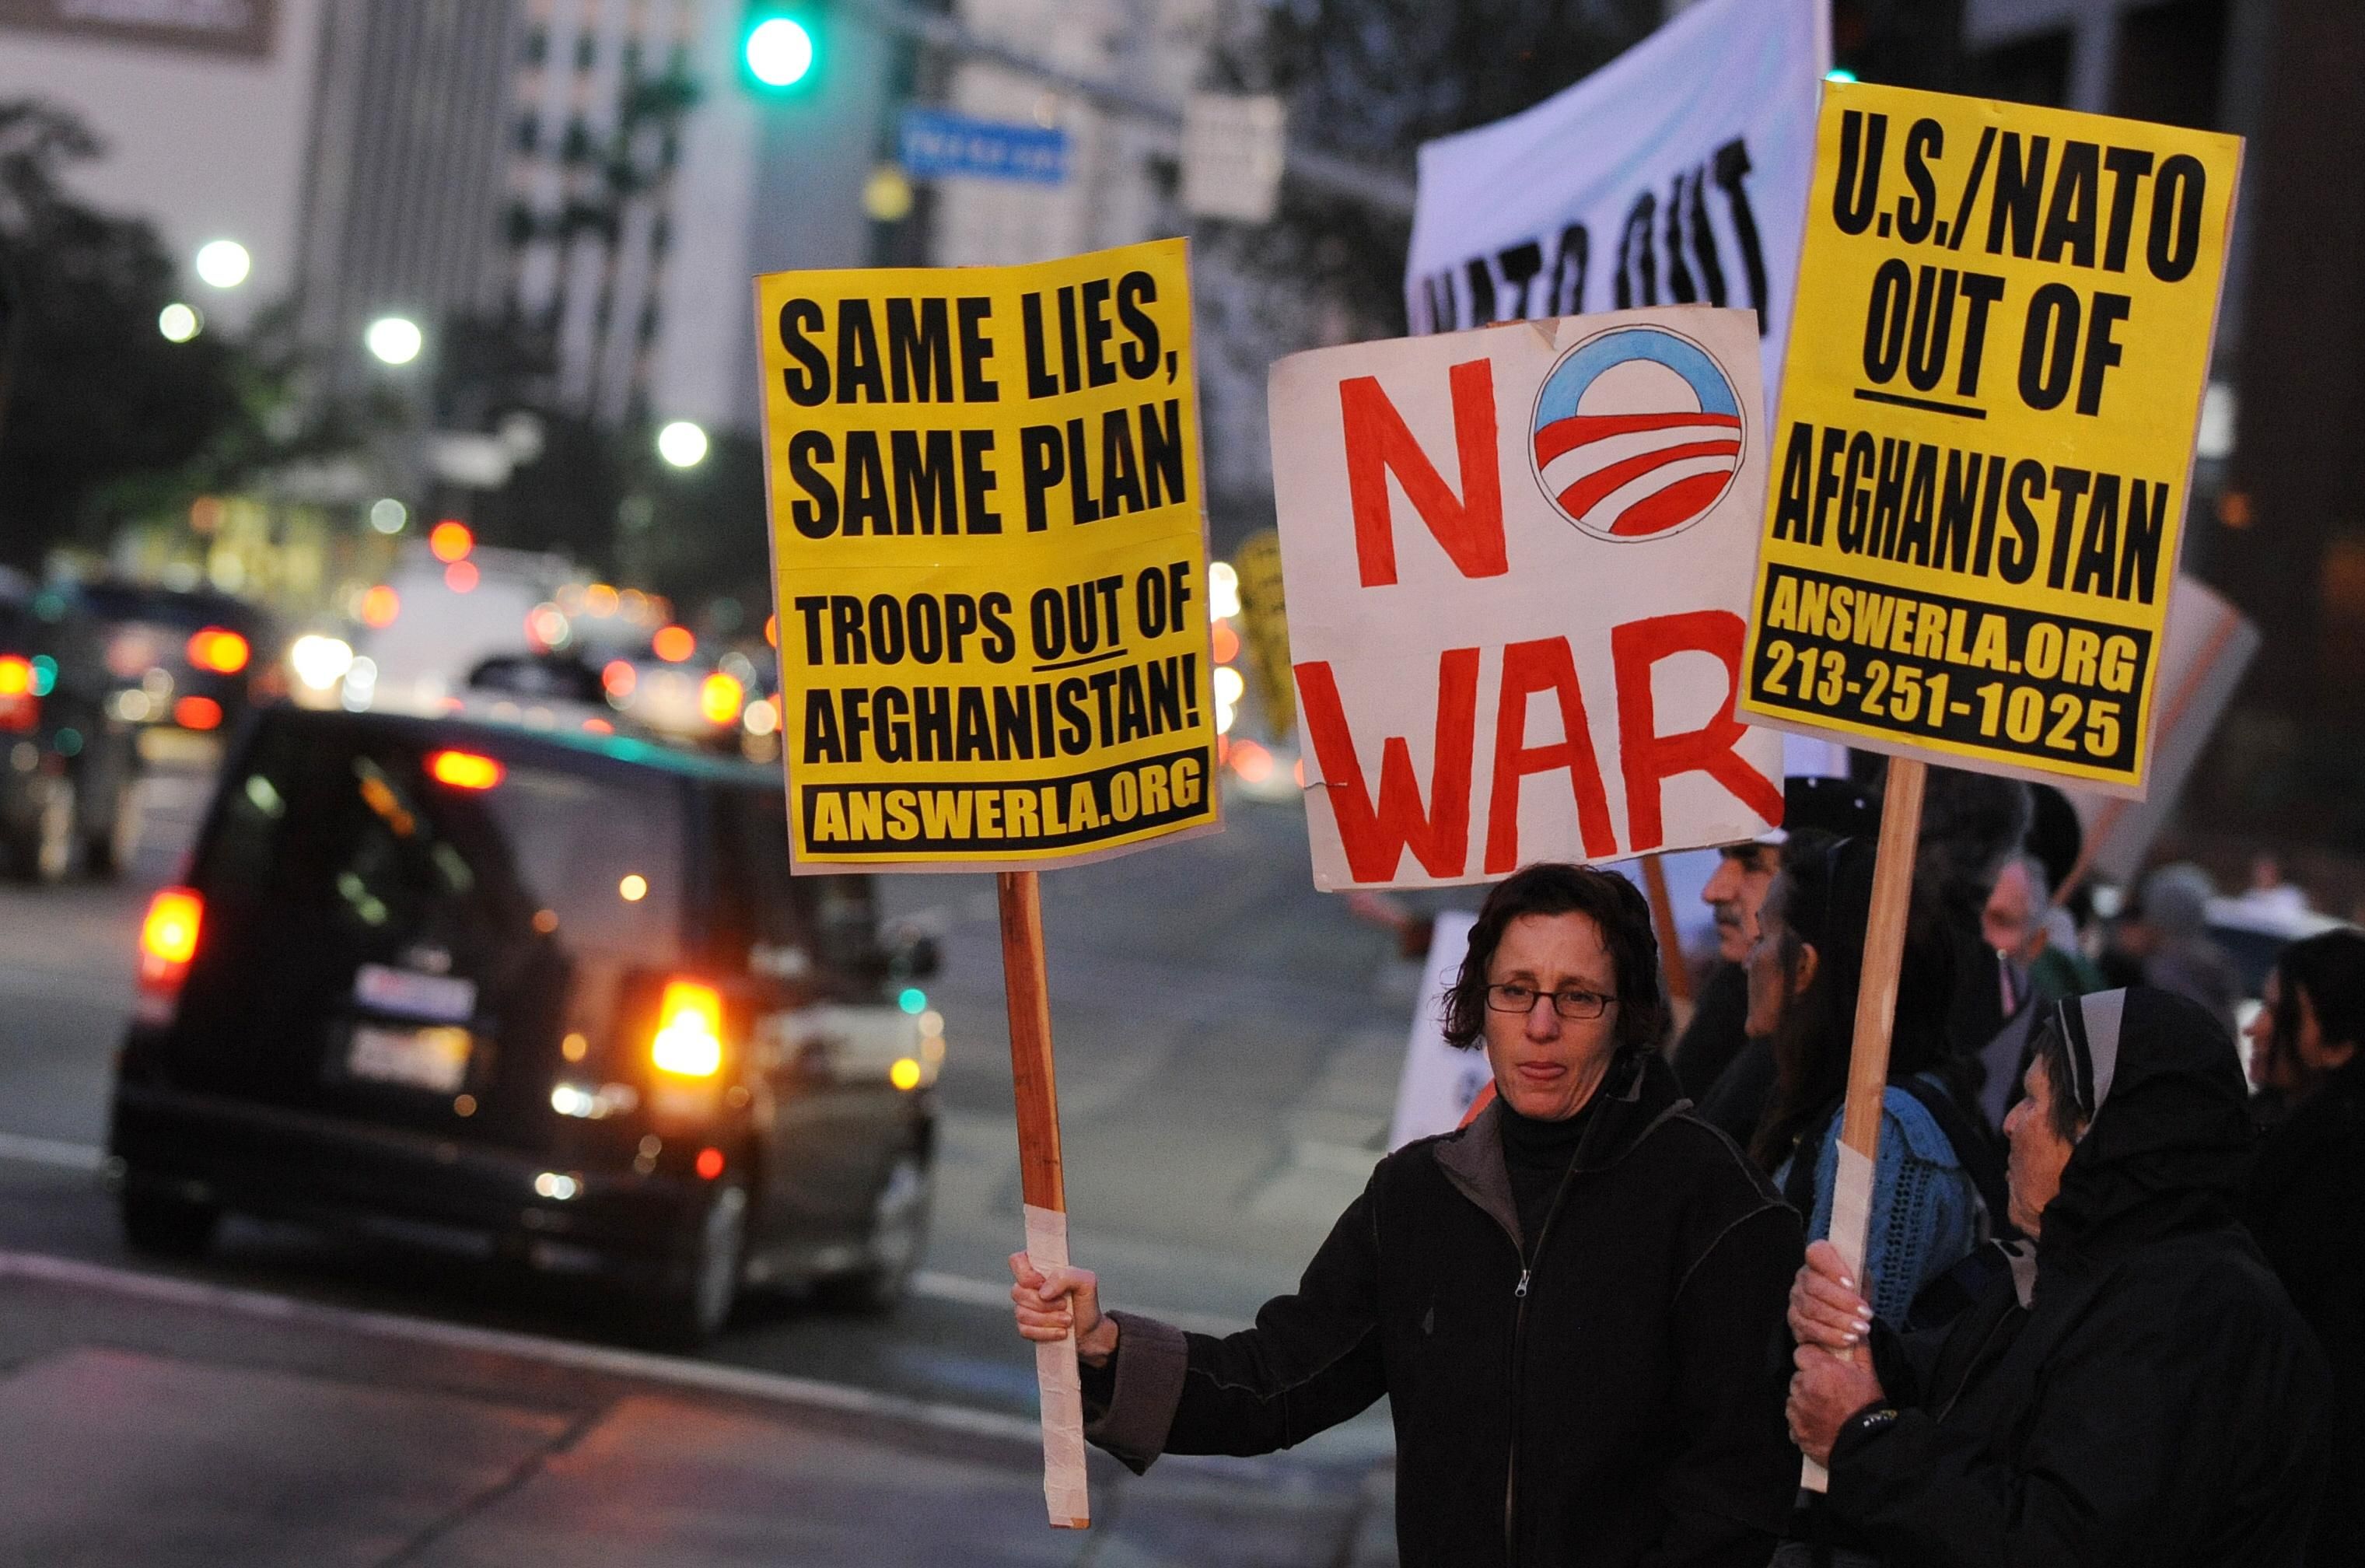 Anti-war demonstrators protest against the announcement of a US troop increase for Afghanistan, at a rally outside the Federal Building in Los Angeles on December 2, 2009. (Photo: MARK RALSTON/AFP/Getty Images)